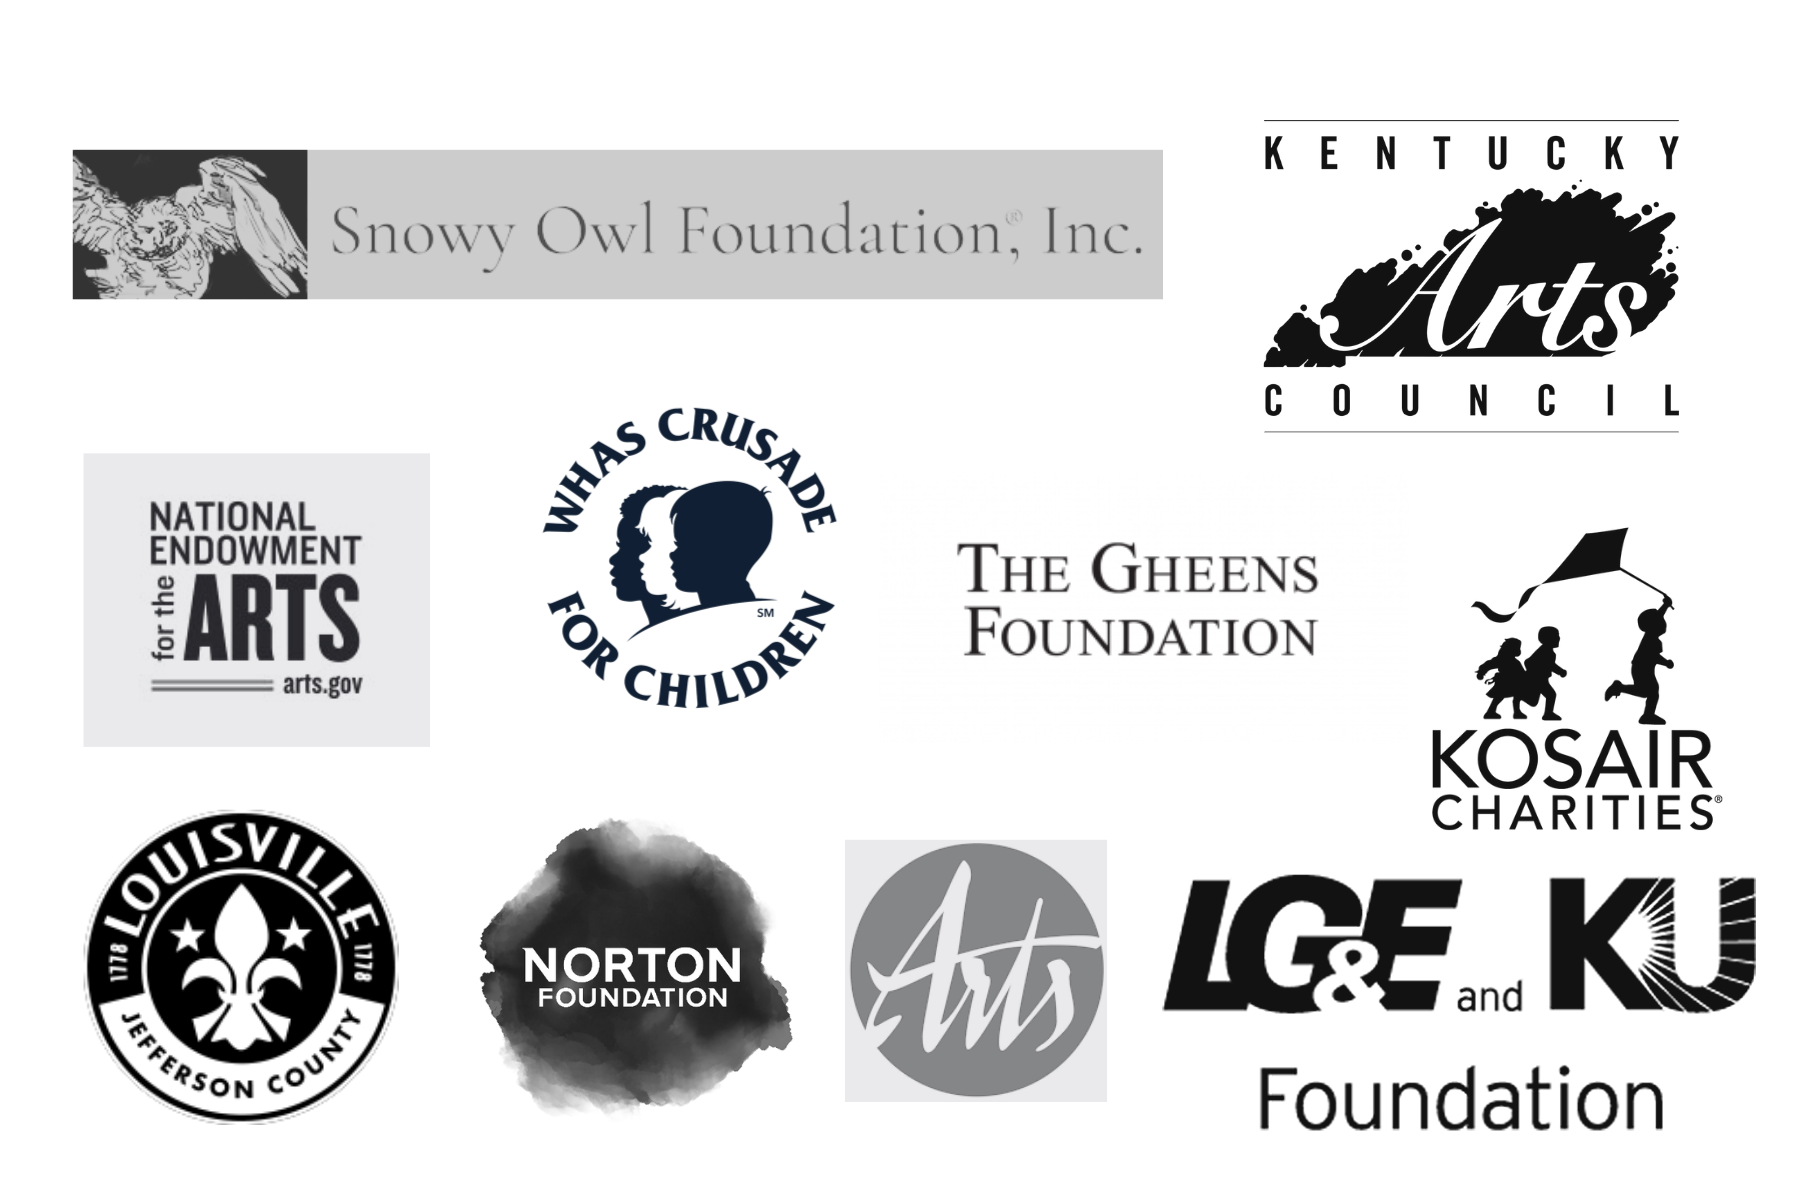 Sponsors include the Snowy Owl Foundation, Kentucky Arts Council, National Endowment for the Arts, WHAS Crusade for Children, The Gheens Foundation, Kosair Charities, Louisville Metro Government, Norton Foundation, LGE and KU Foundation